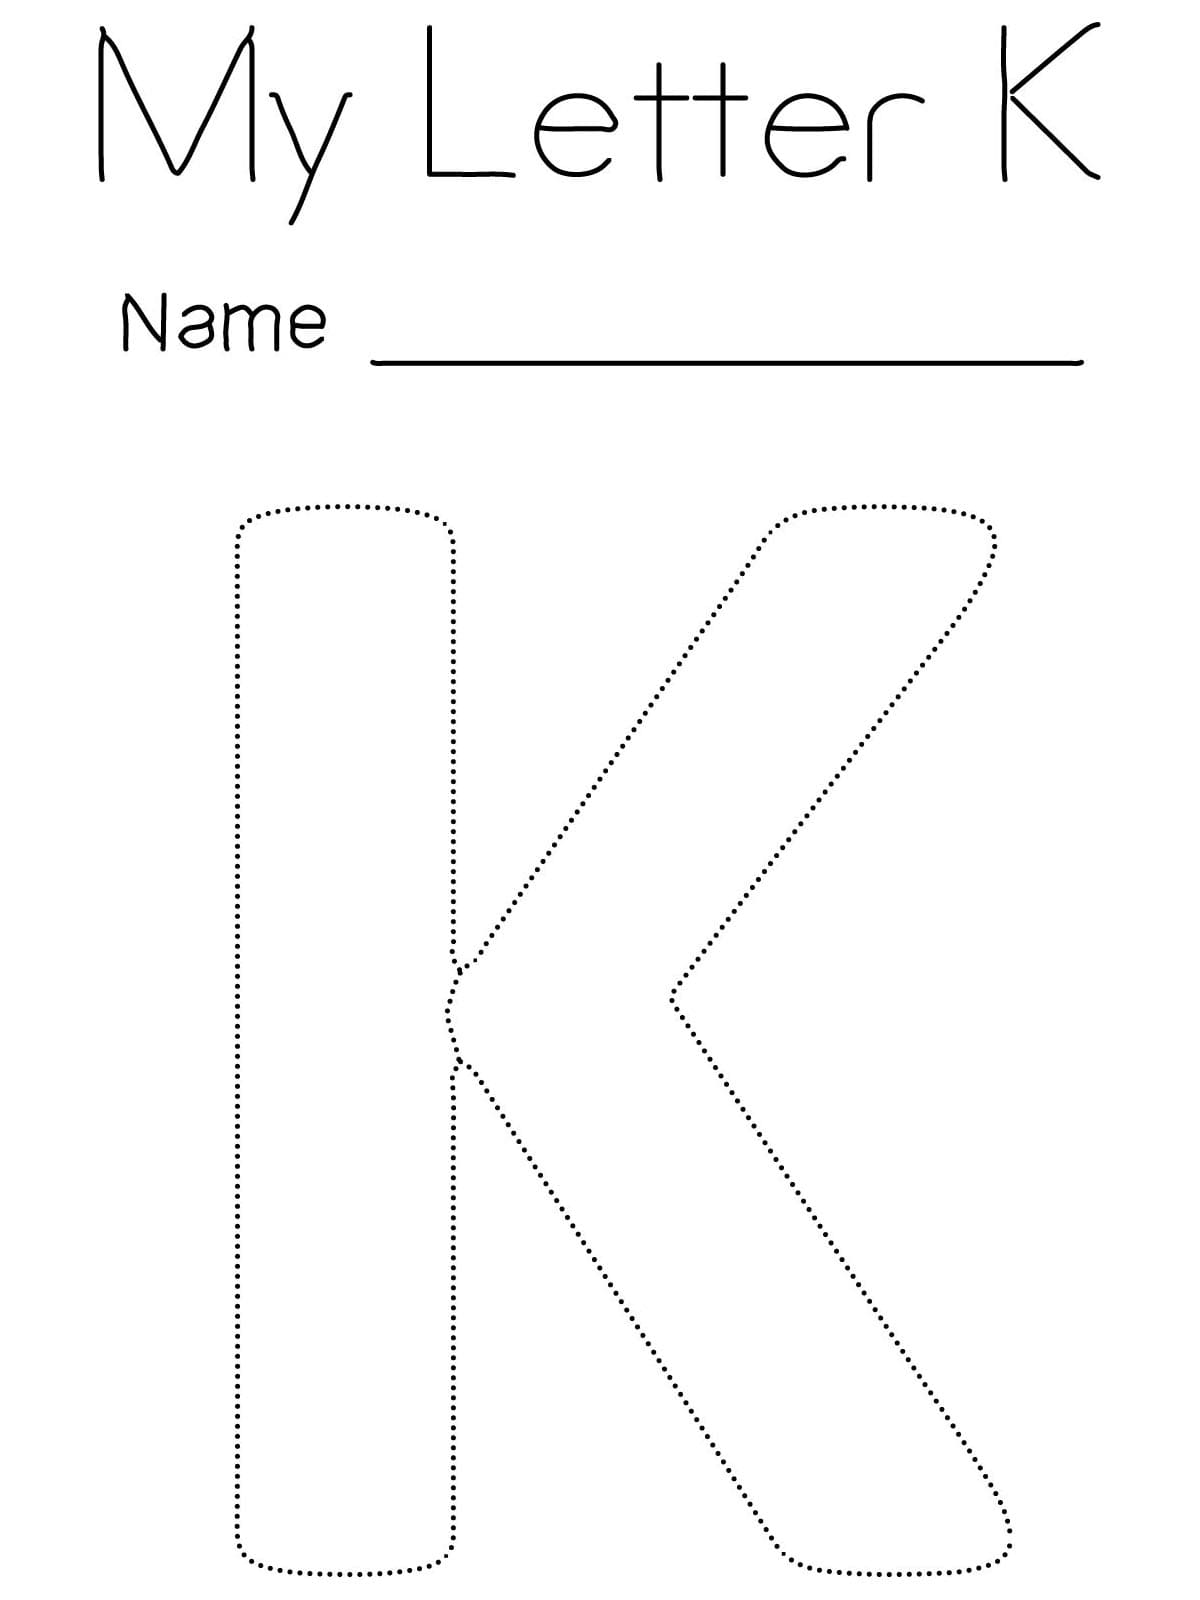 letter-k-tracing-coloring-page-download-print-or-color-online-for-free